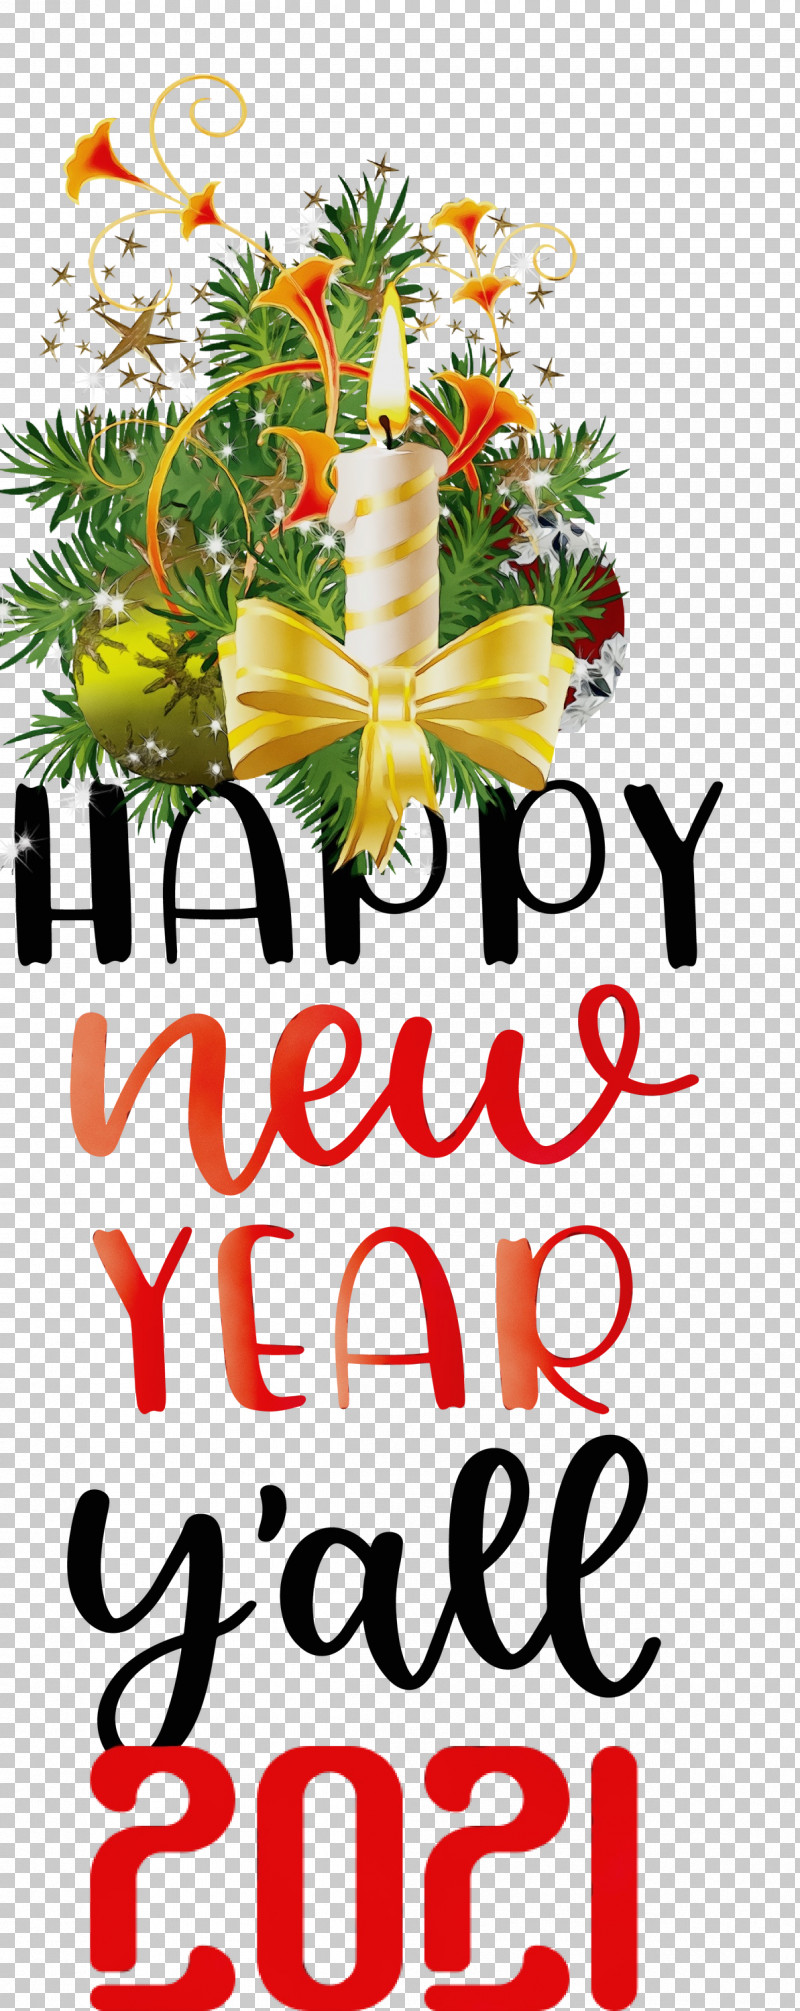 Floral Design PNG, Clipart, 2021 Happy New Year, 2021 New Year, 2021 Wishes, Cut Flowers, Floral Design Free PNG Download